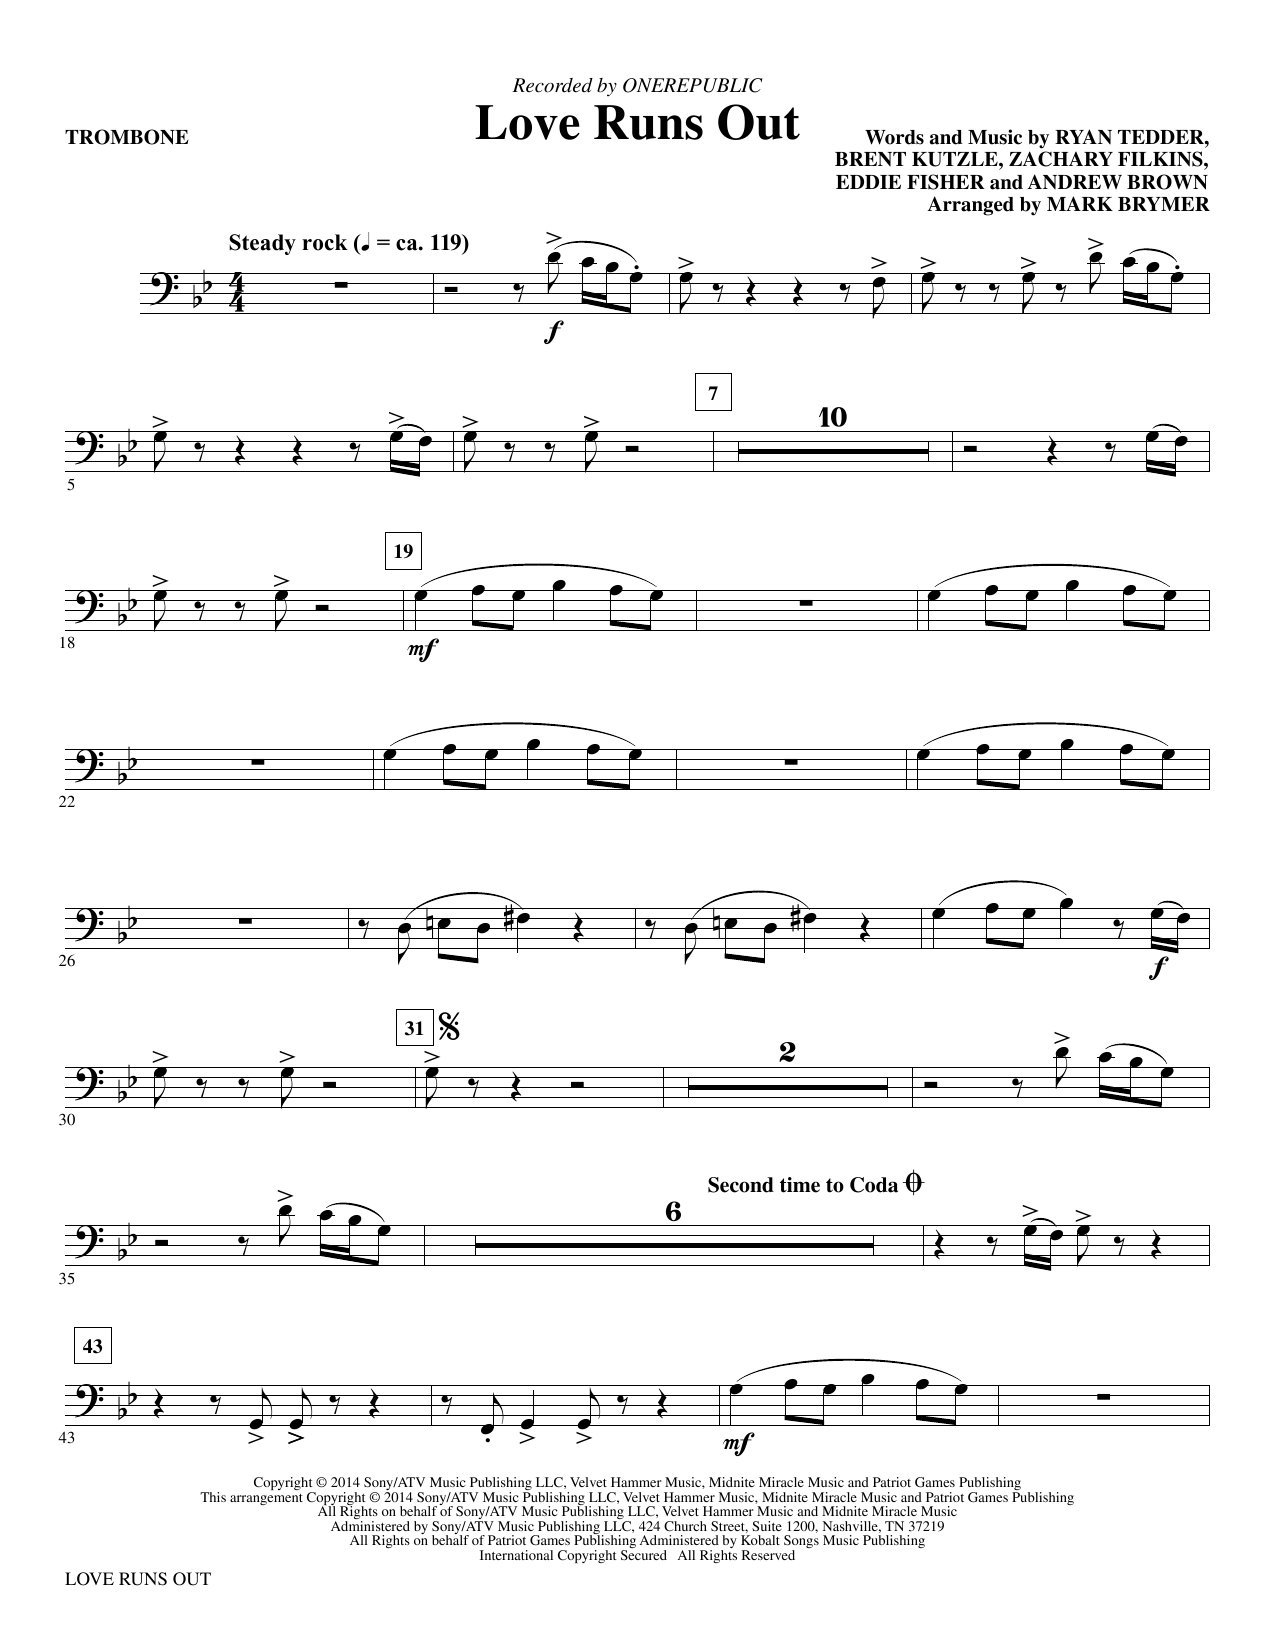 Mark Brymer Love Runs Out - Trombone sheet music notes and chords. Download Printable PDF.